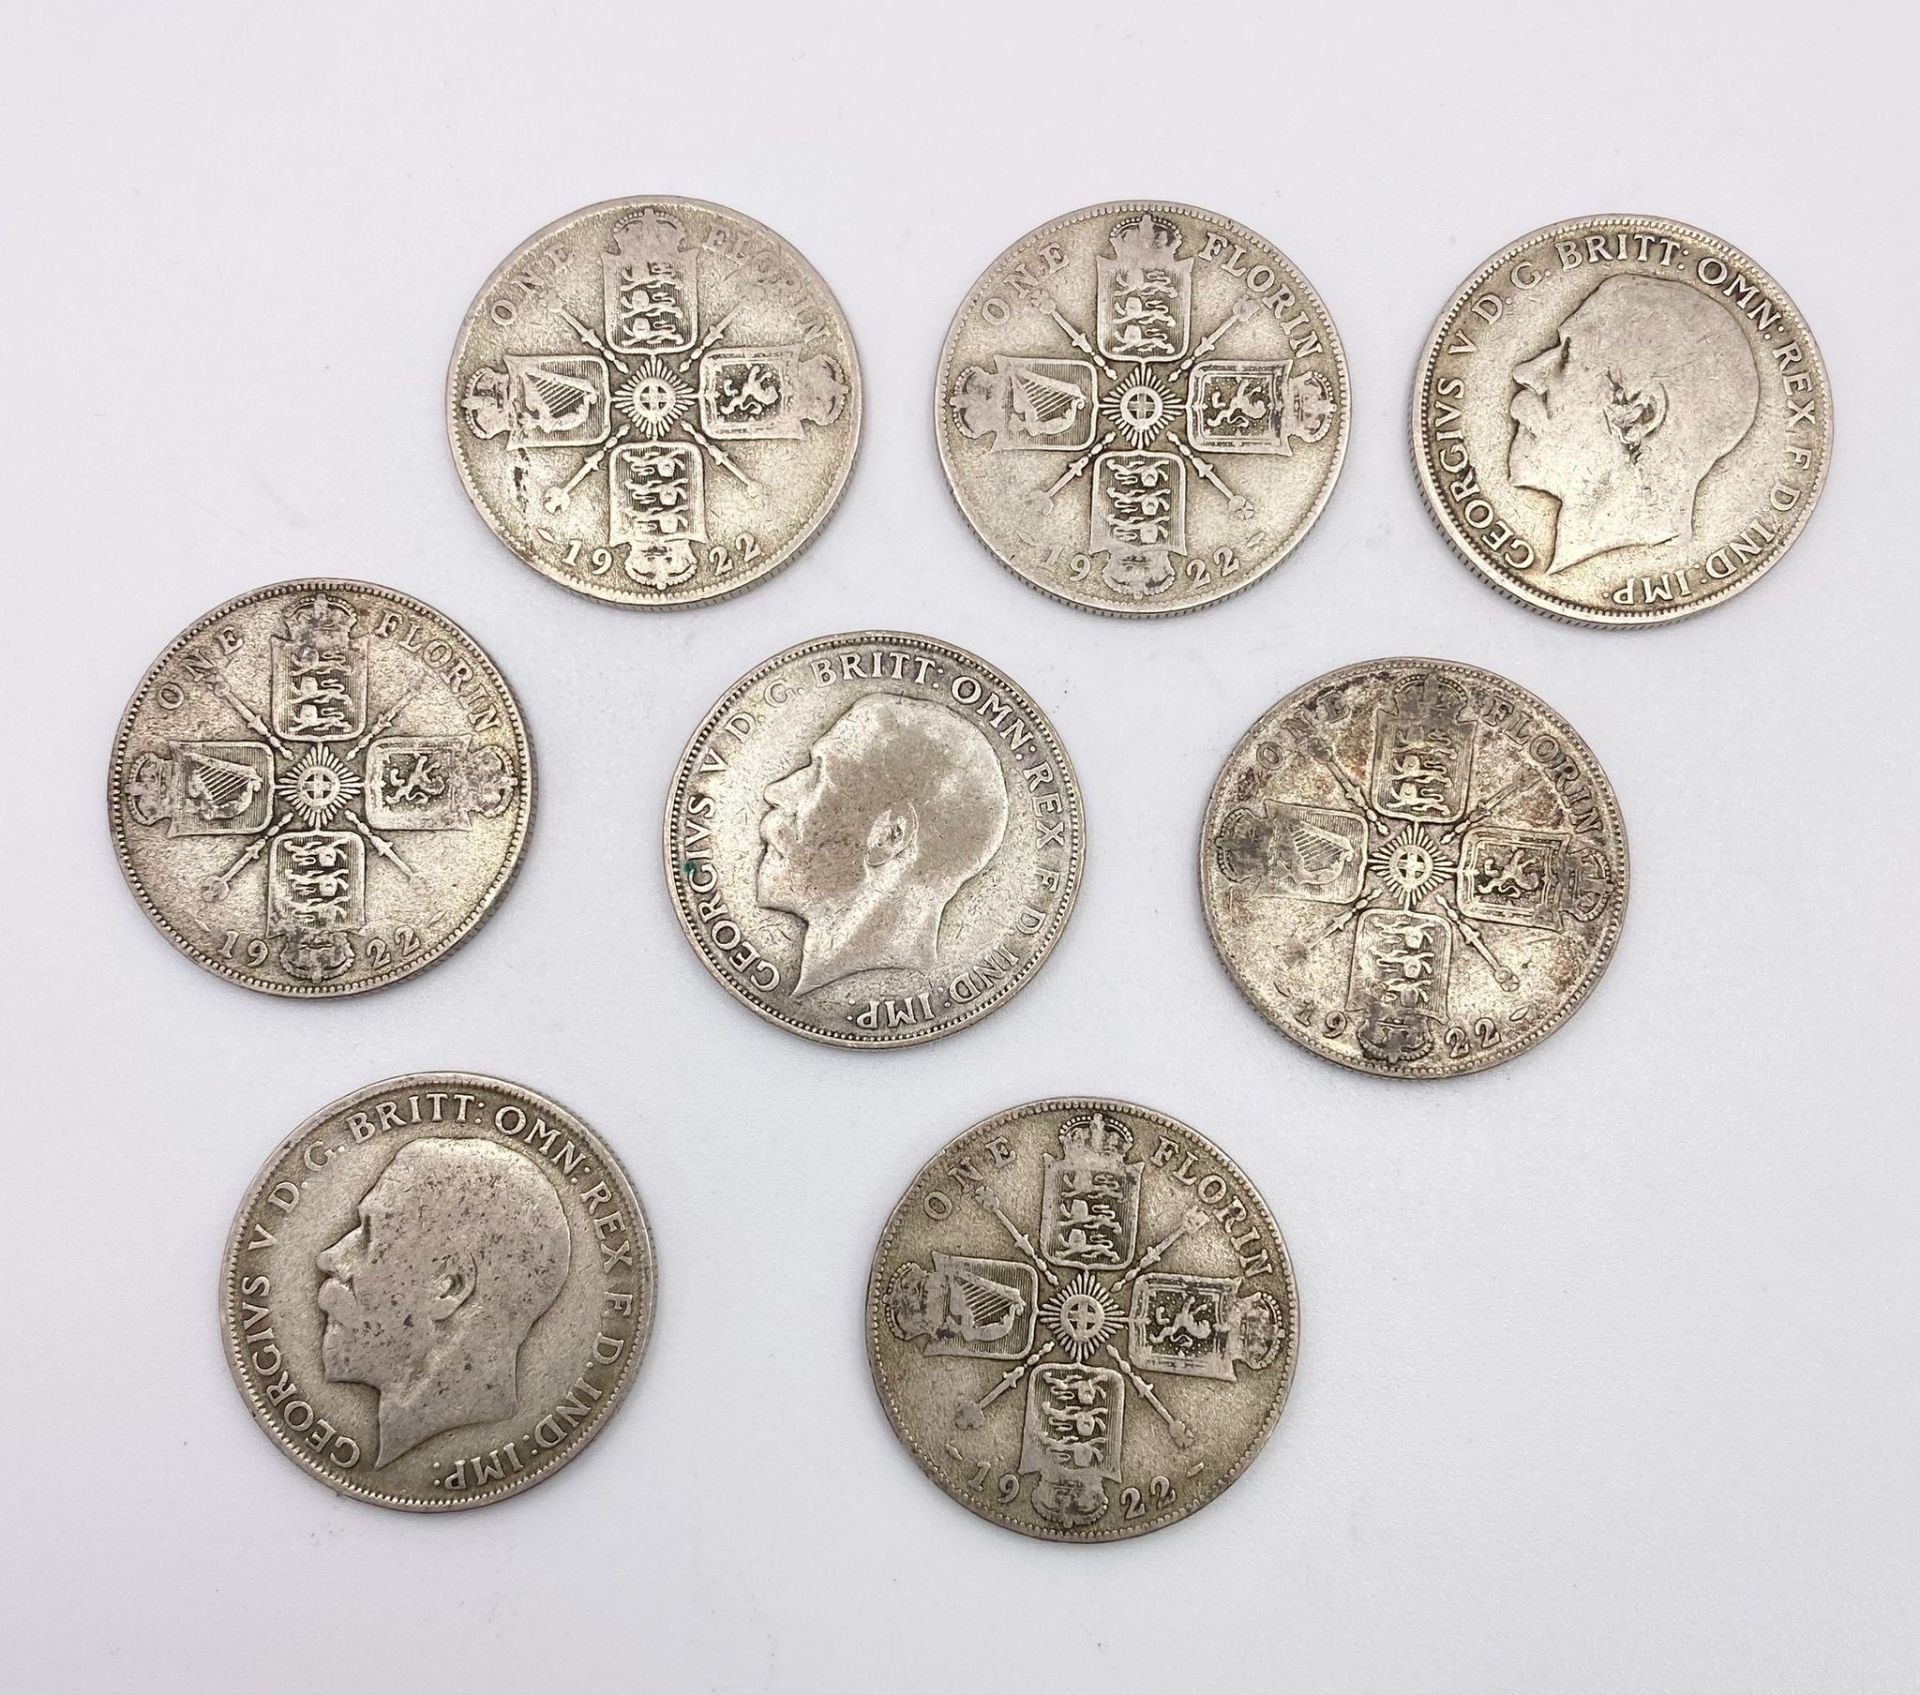 A Set of 8 British Florin Coins, All Dated 1922, Fair to Good Condition. Total Weight 88 grams - Image 2 of 3